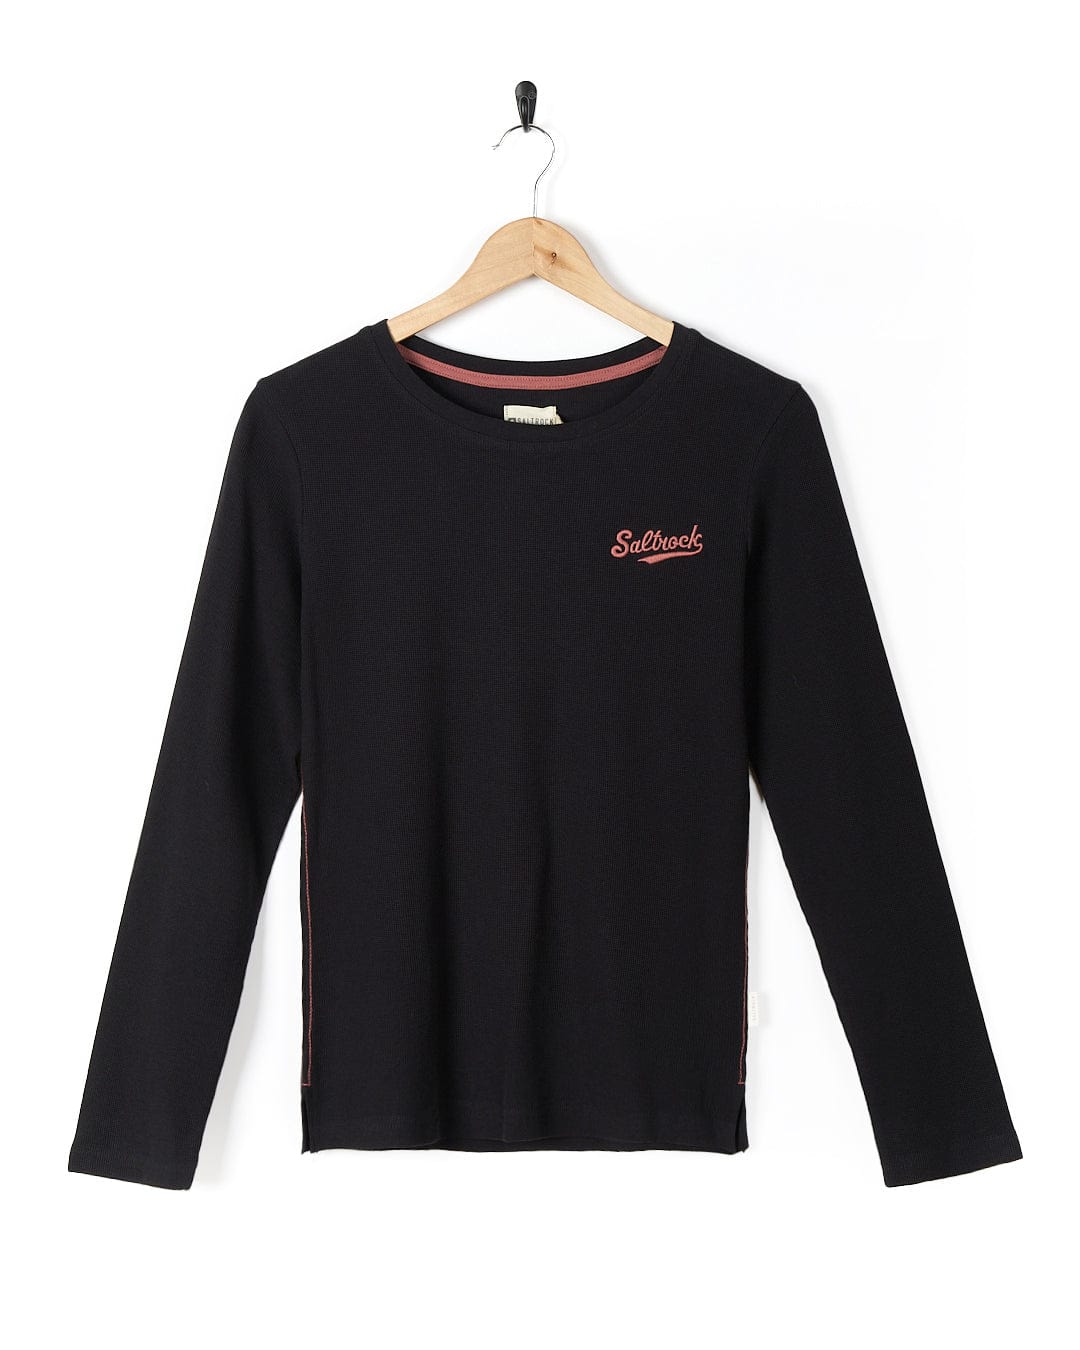 A Saltrock Rory Womens Long Sleeve Waffle T-Shirt - Black with an embroidered logo.